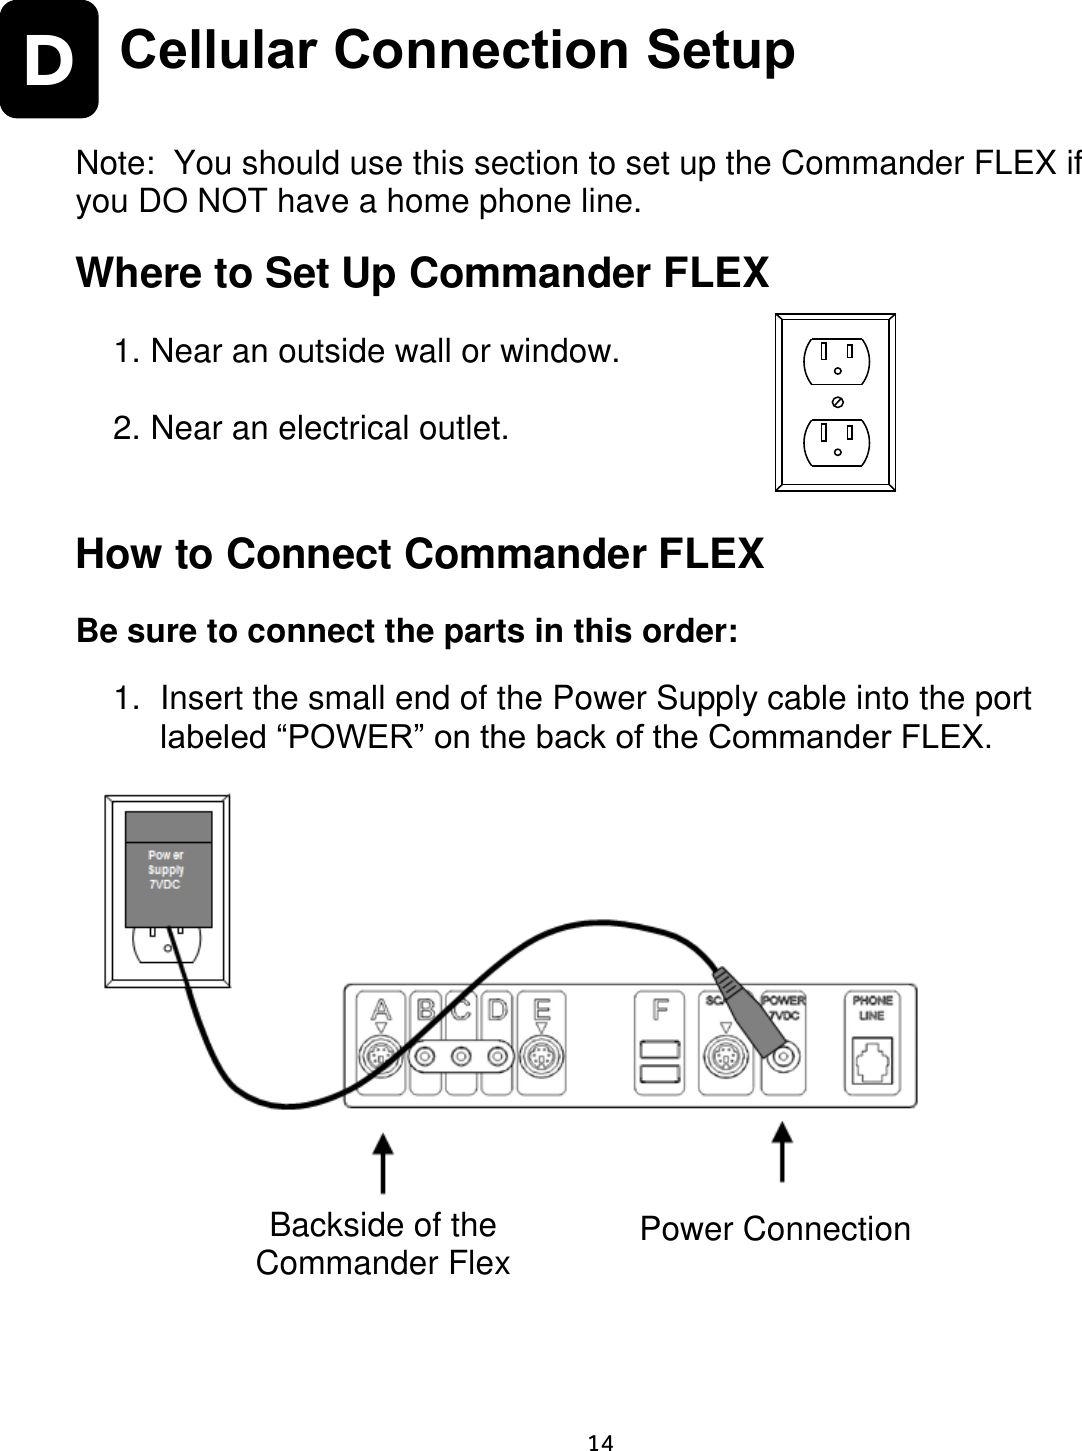     14  D Cellular Connection Setup   Note:  You should use this section to set up the Commander FLEX if you DO NOT have a home phone line.  Where to Set Up Commander FLEX   1. Near an outside wall or window.    2. Near an electrical outlet.   How to Connect Commander FLEX  Be sure to connect the parts in this order:  1.  Insert the small end of the Power Supply cable into the port labeled “POWER” on the back of the Commander FLEX.                          Backside of the Commander Flex Power Connection 